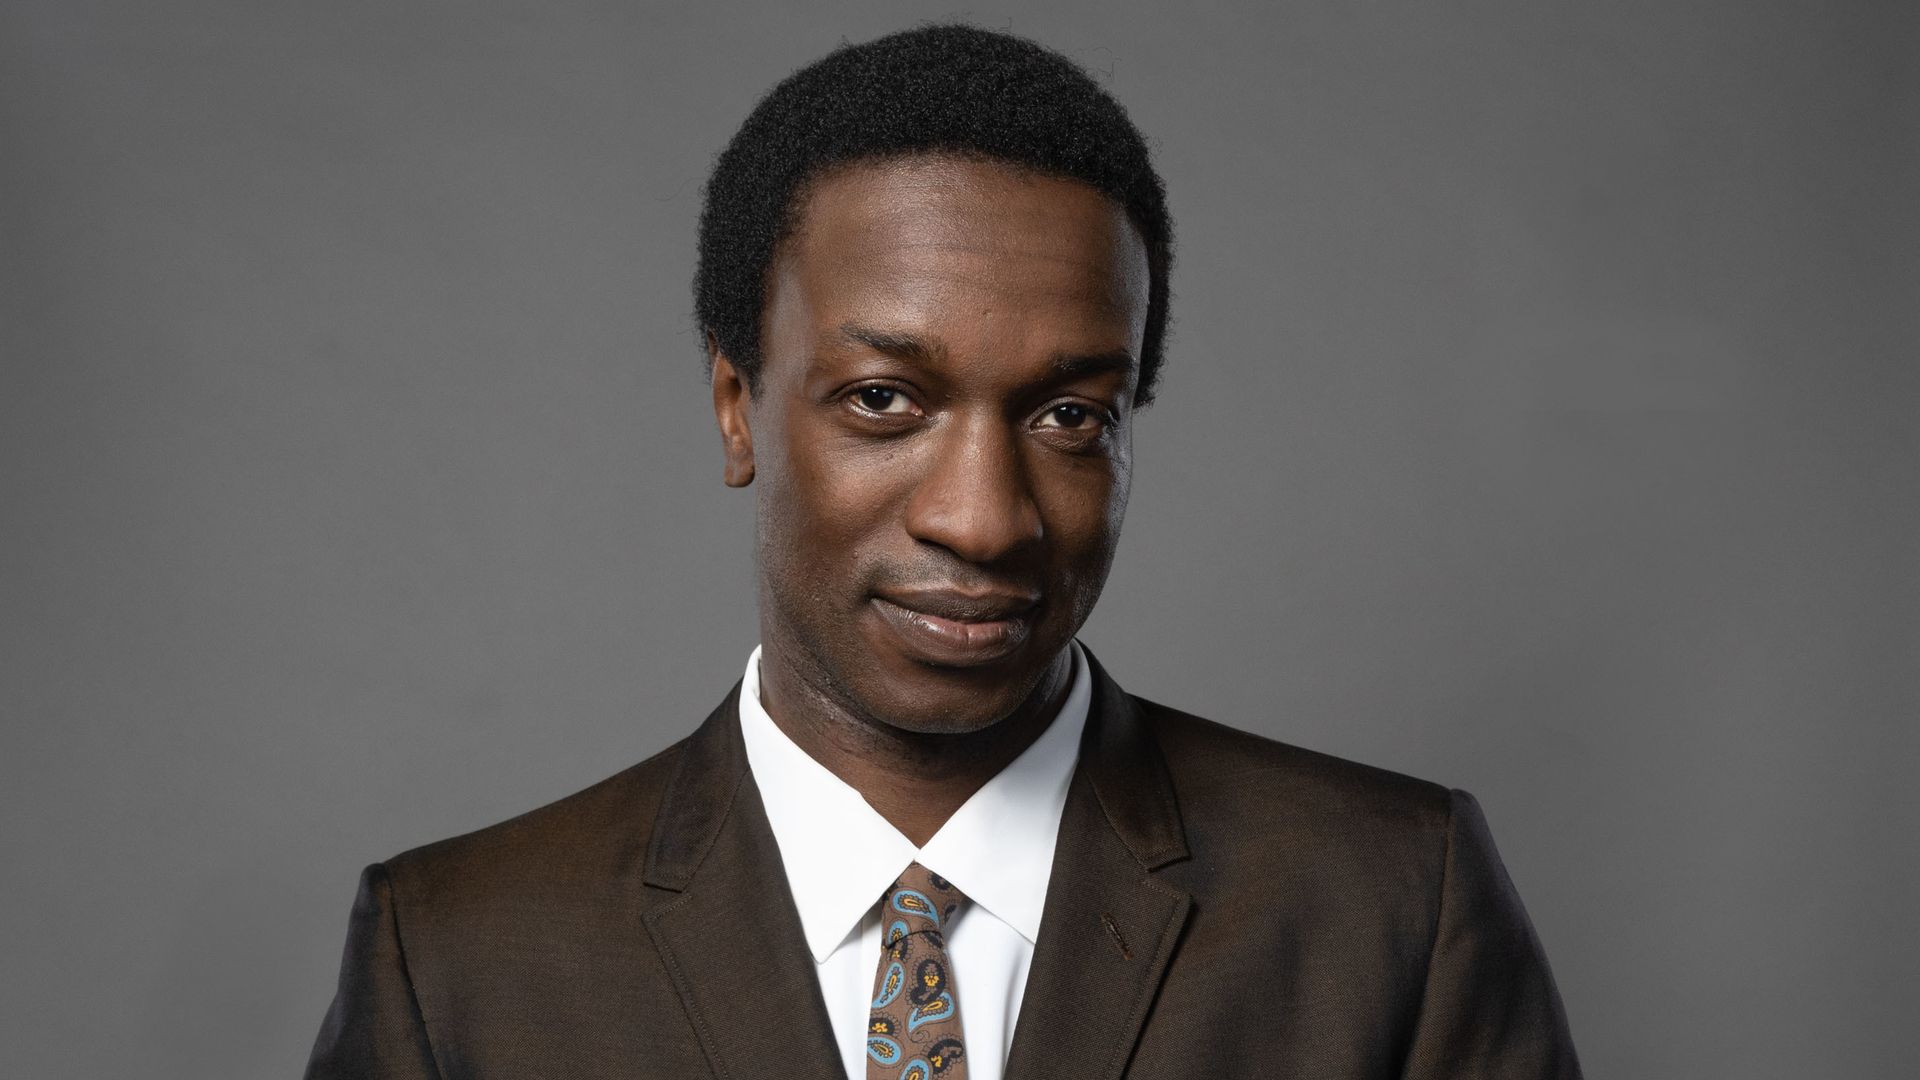  Zephryn Taitte as Cyril on Call the Midwife 